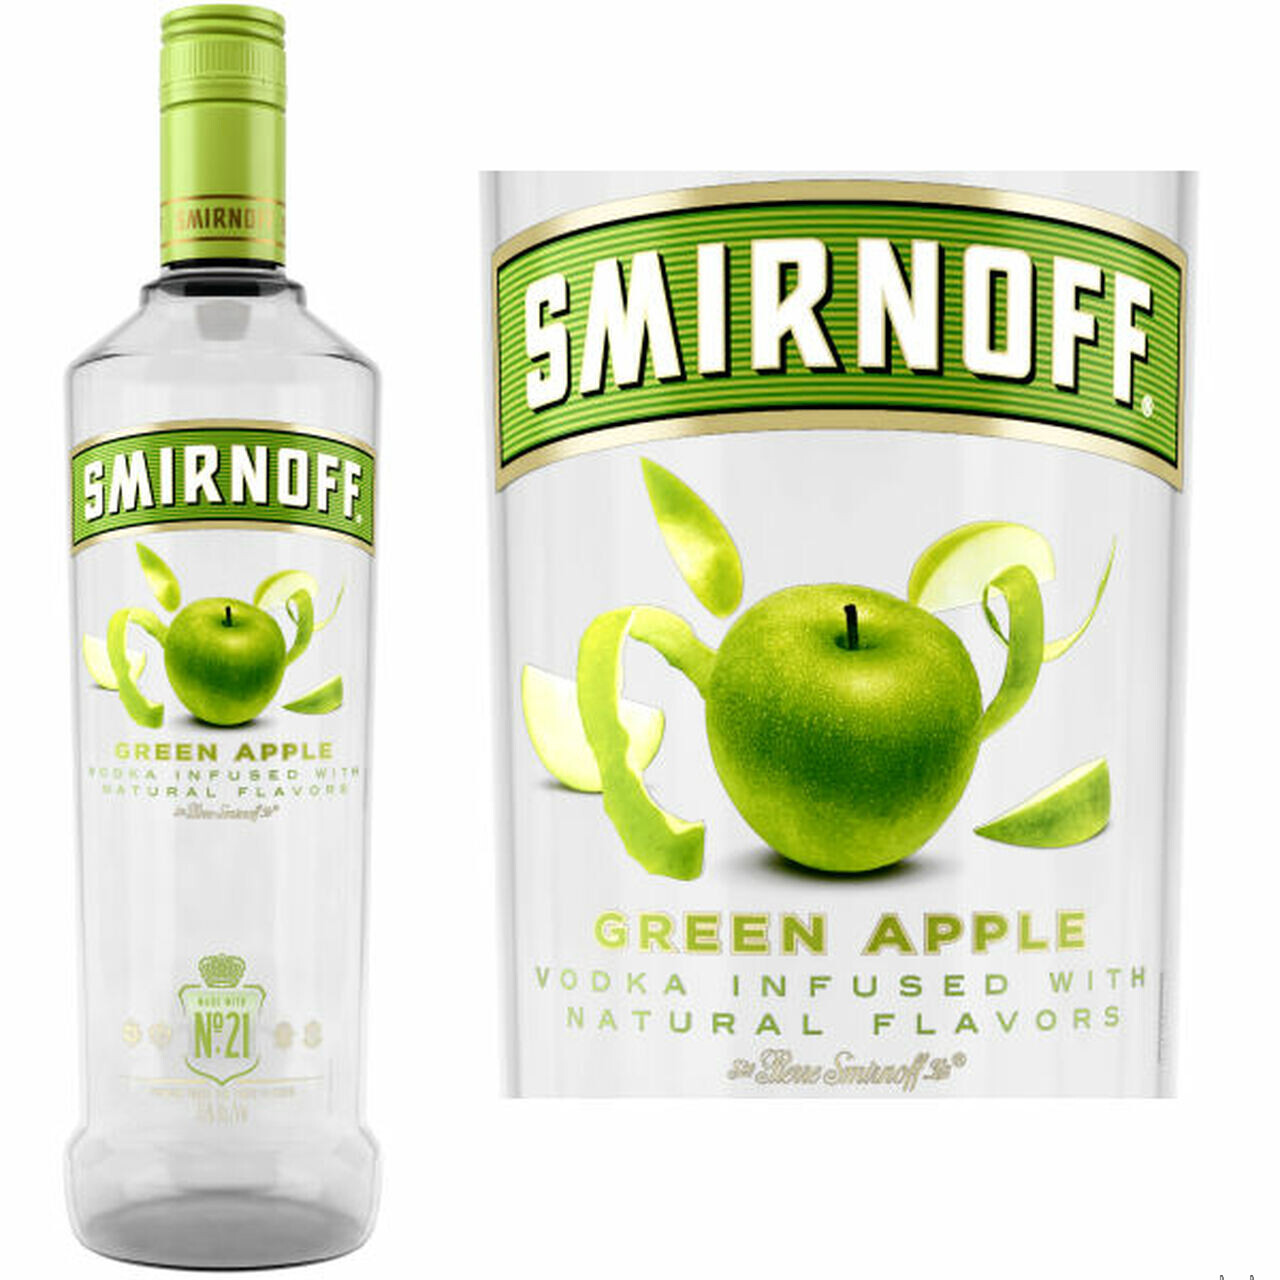 how much alcohol is in smirnoff green apple vodka